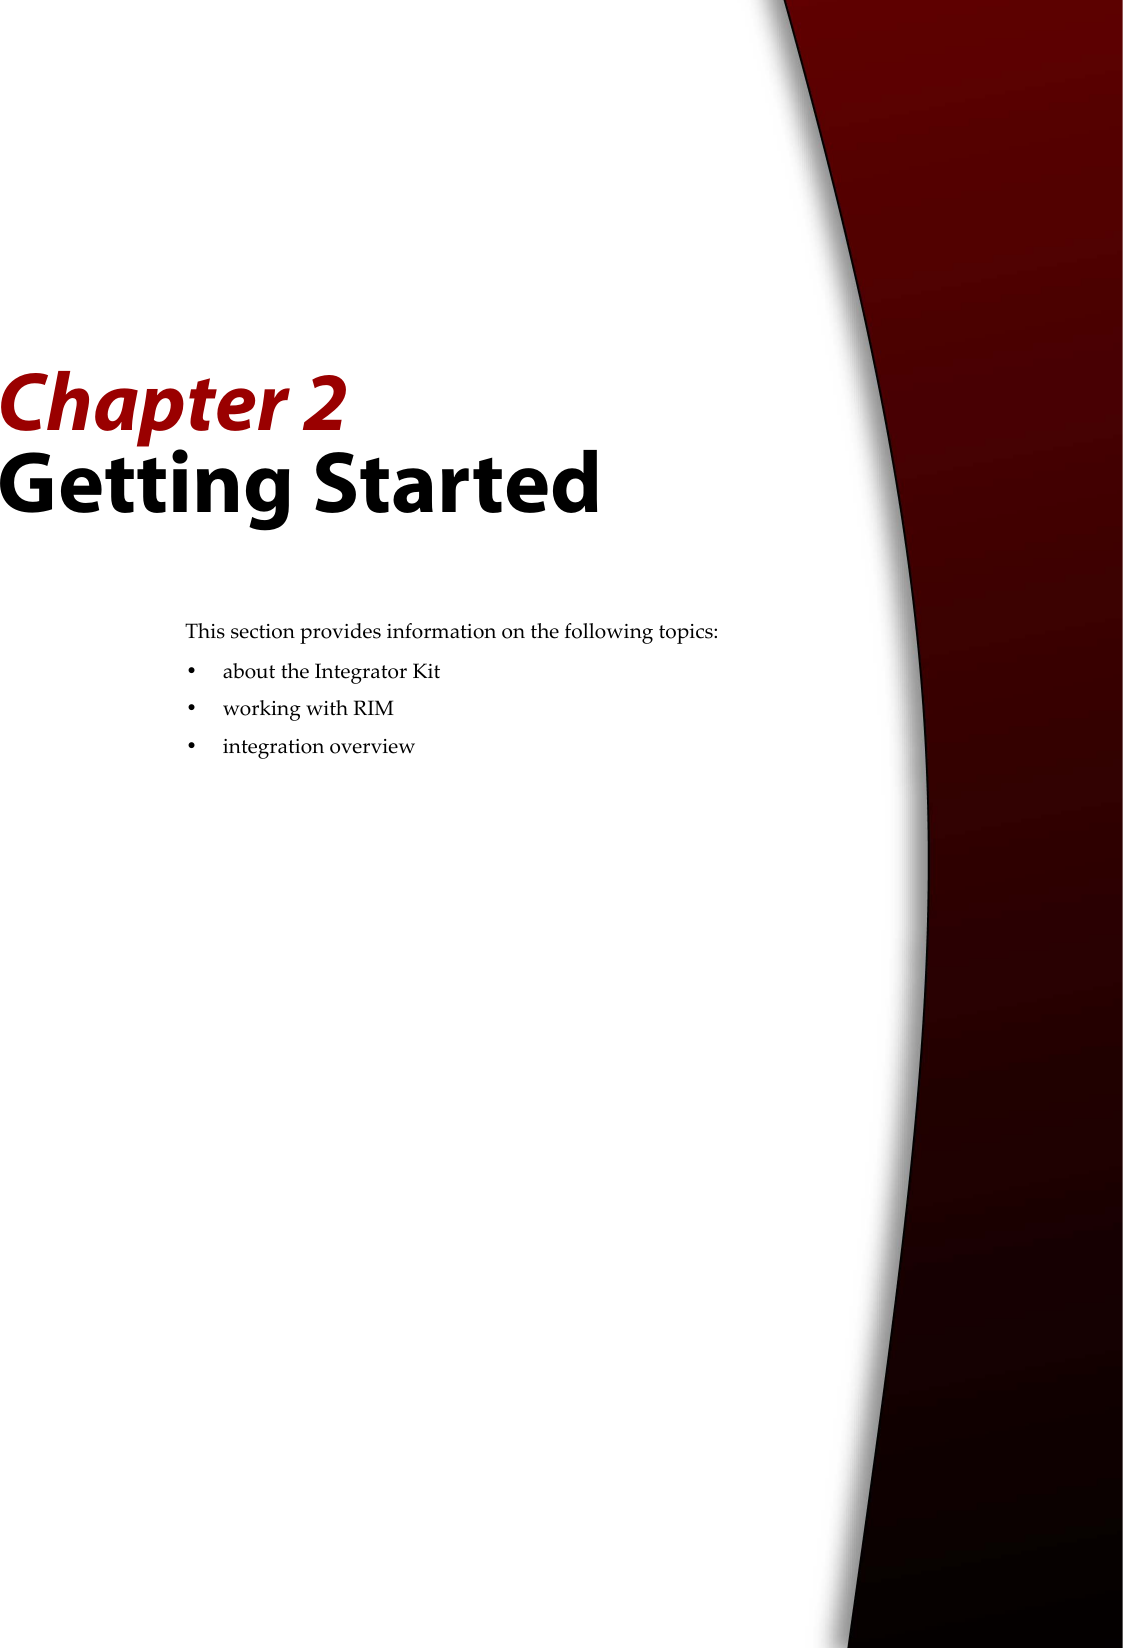 Chapter 2Getting StartedThis section provides information on the following topics:•about the Integrator Kit•working with RIM•integration overview